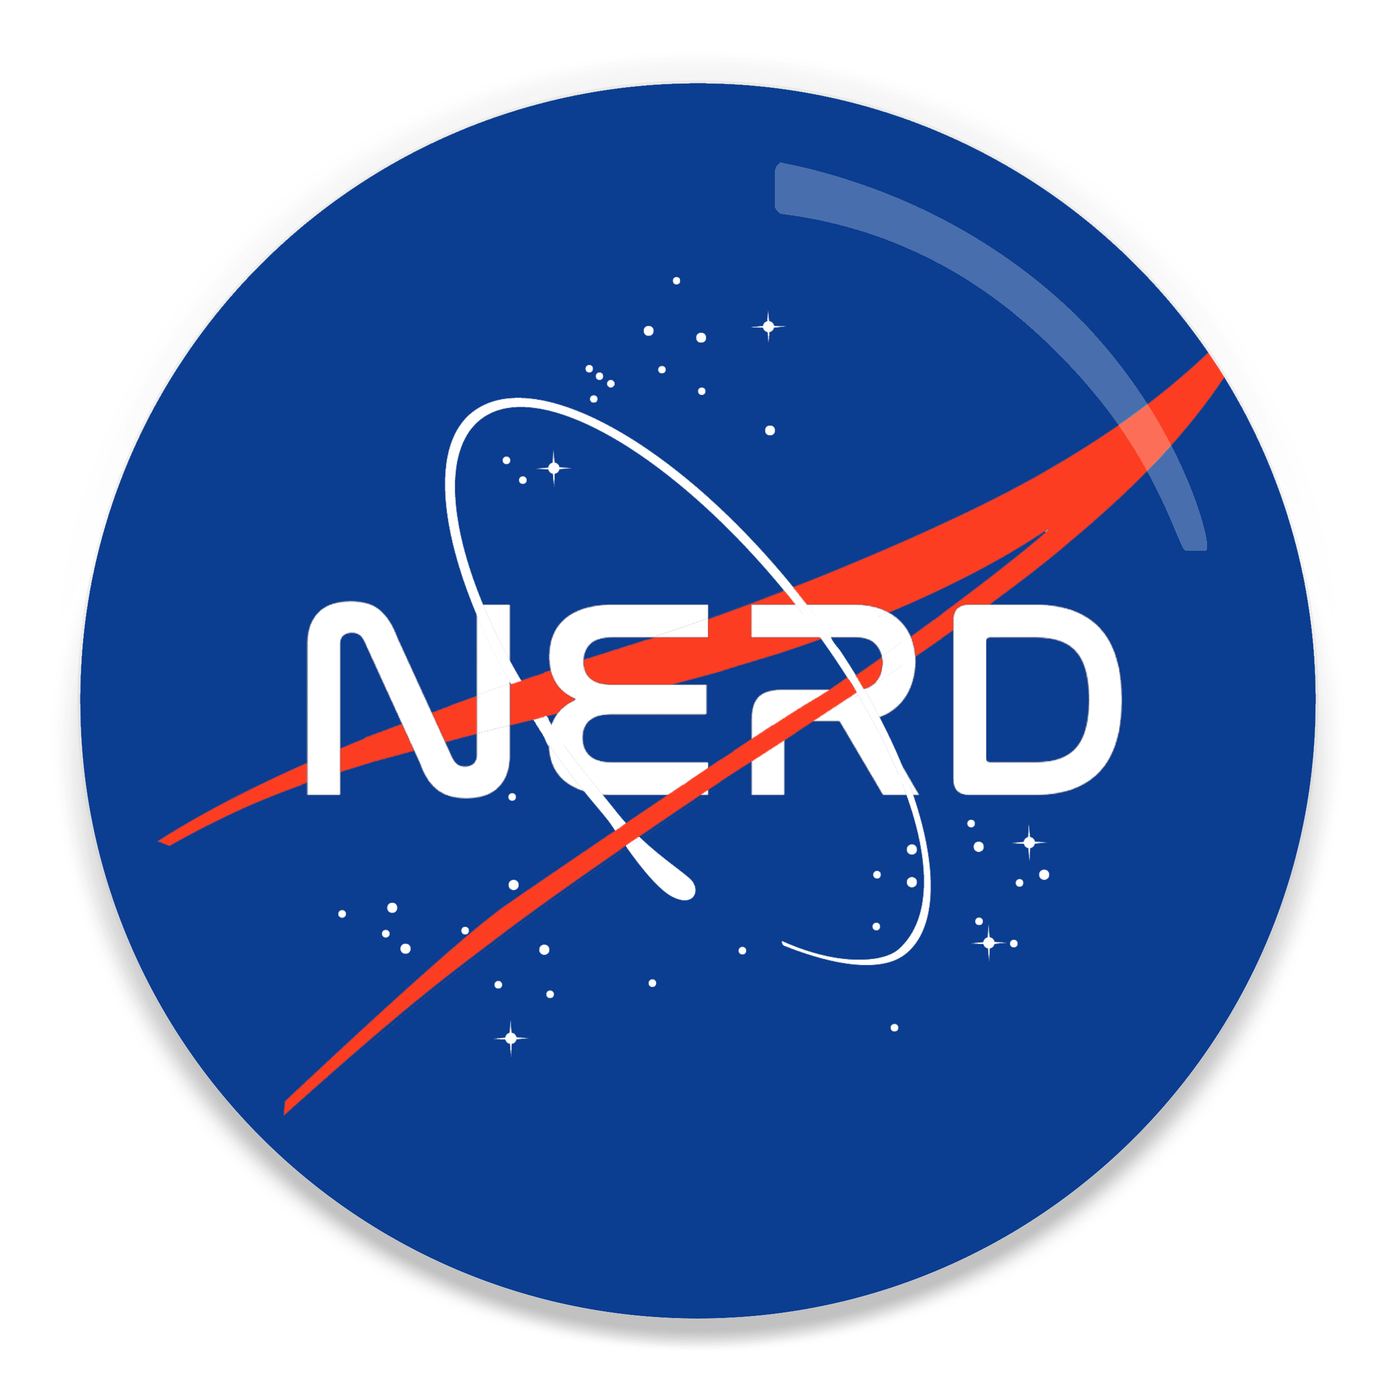 2.25 inch round colorful magnet with image of the word nerd written as the nasa logo